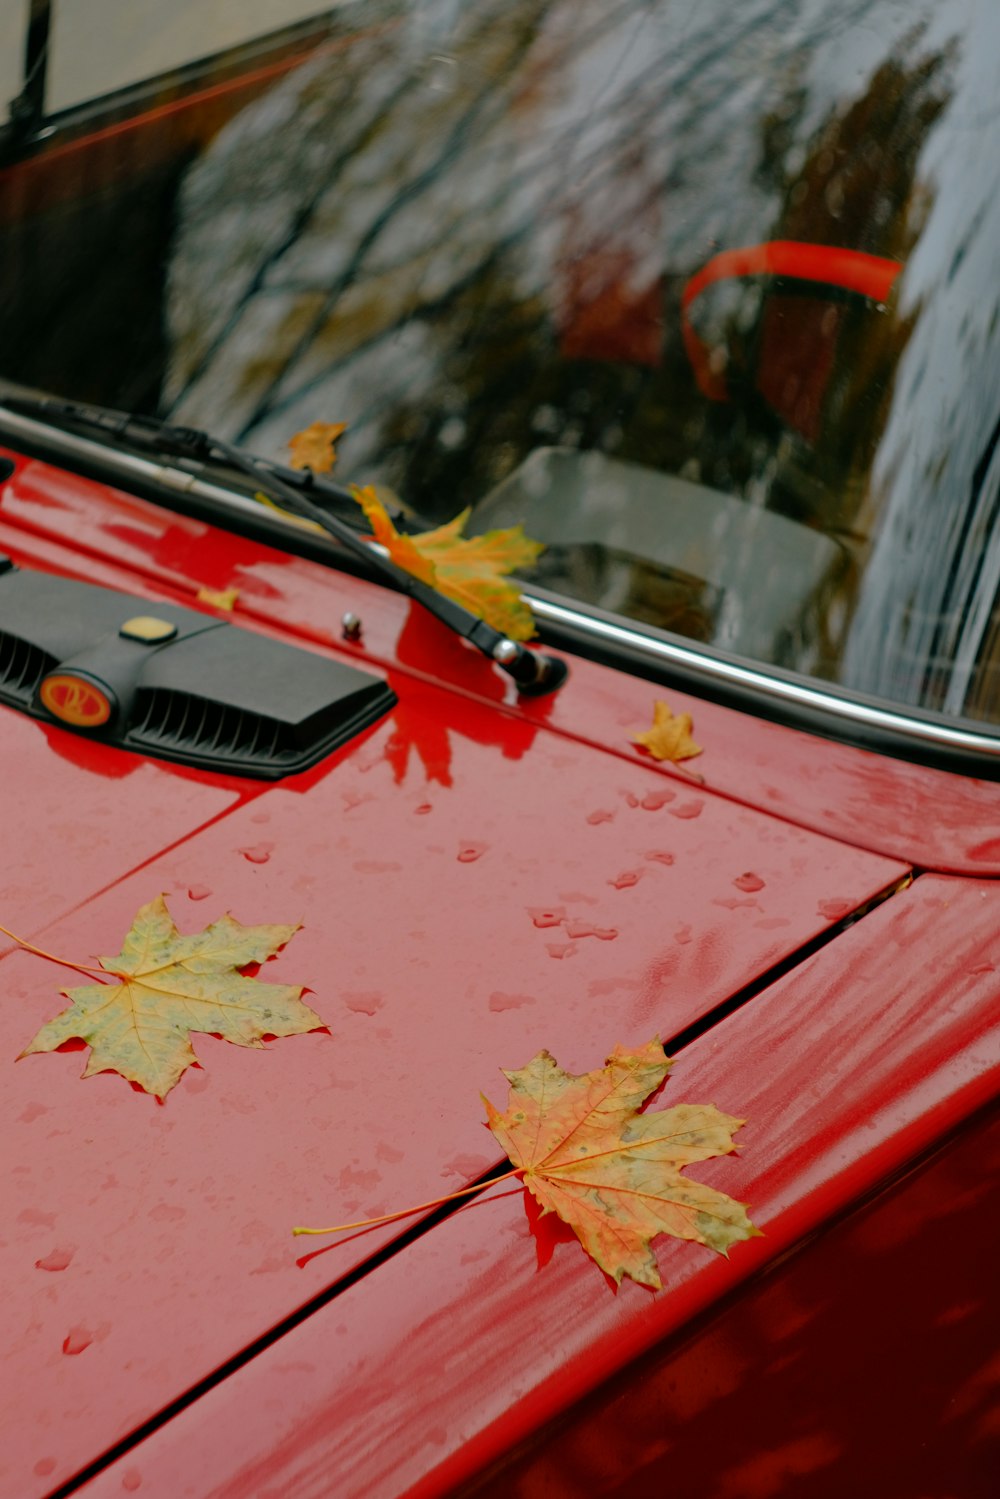 a red car with yellow leaves on the hood